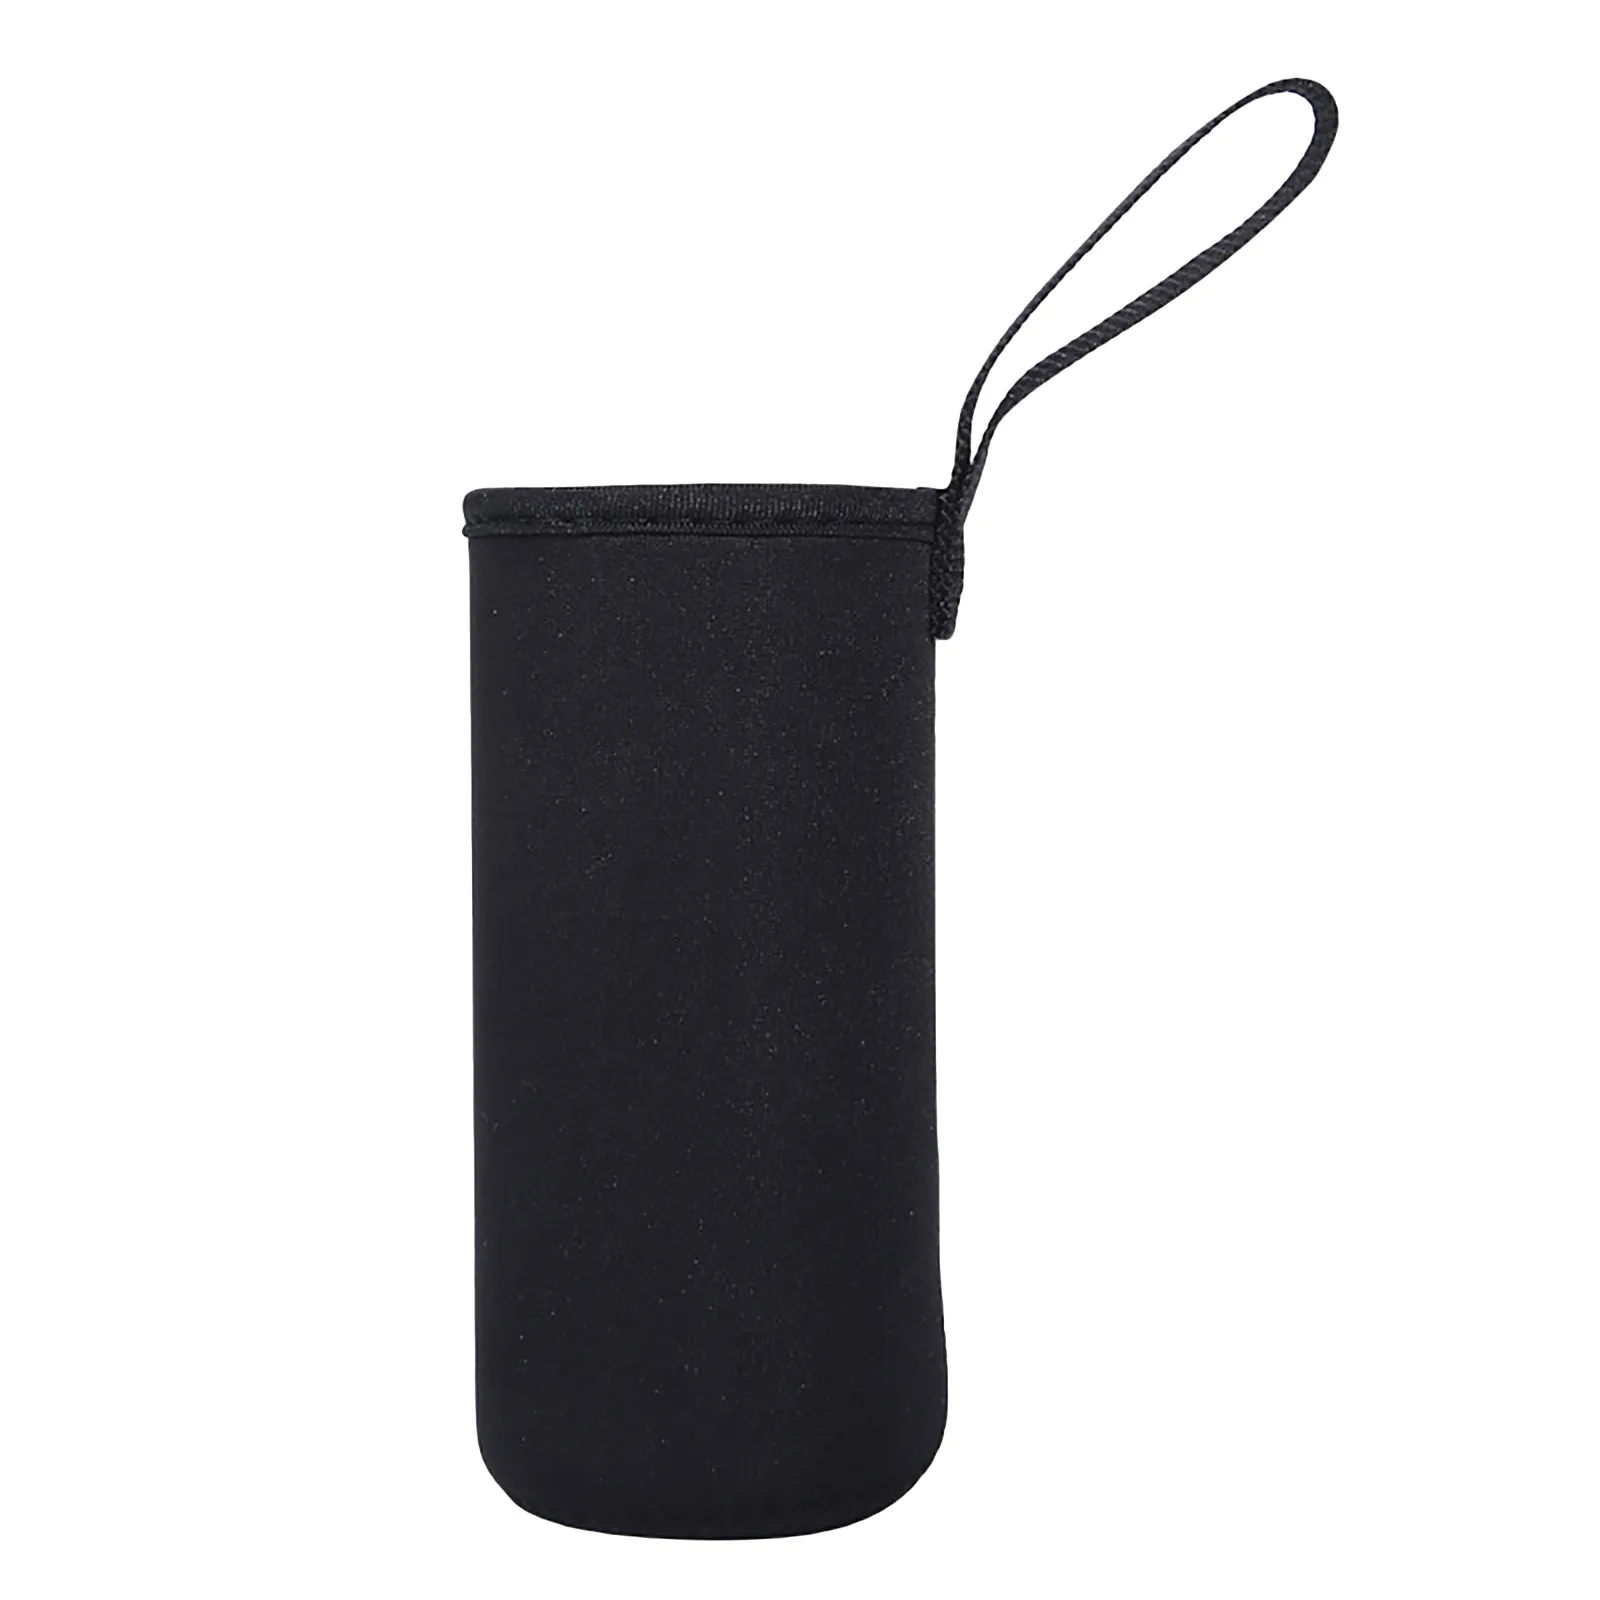 insulated drinking glasses Insulated Neoprene Water Bottle Sleeve With Rope Water Bottles Bag Cover Pouch Holder Bottle Insulator For 19x6.8cm gold rimmed drinking glasses